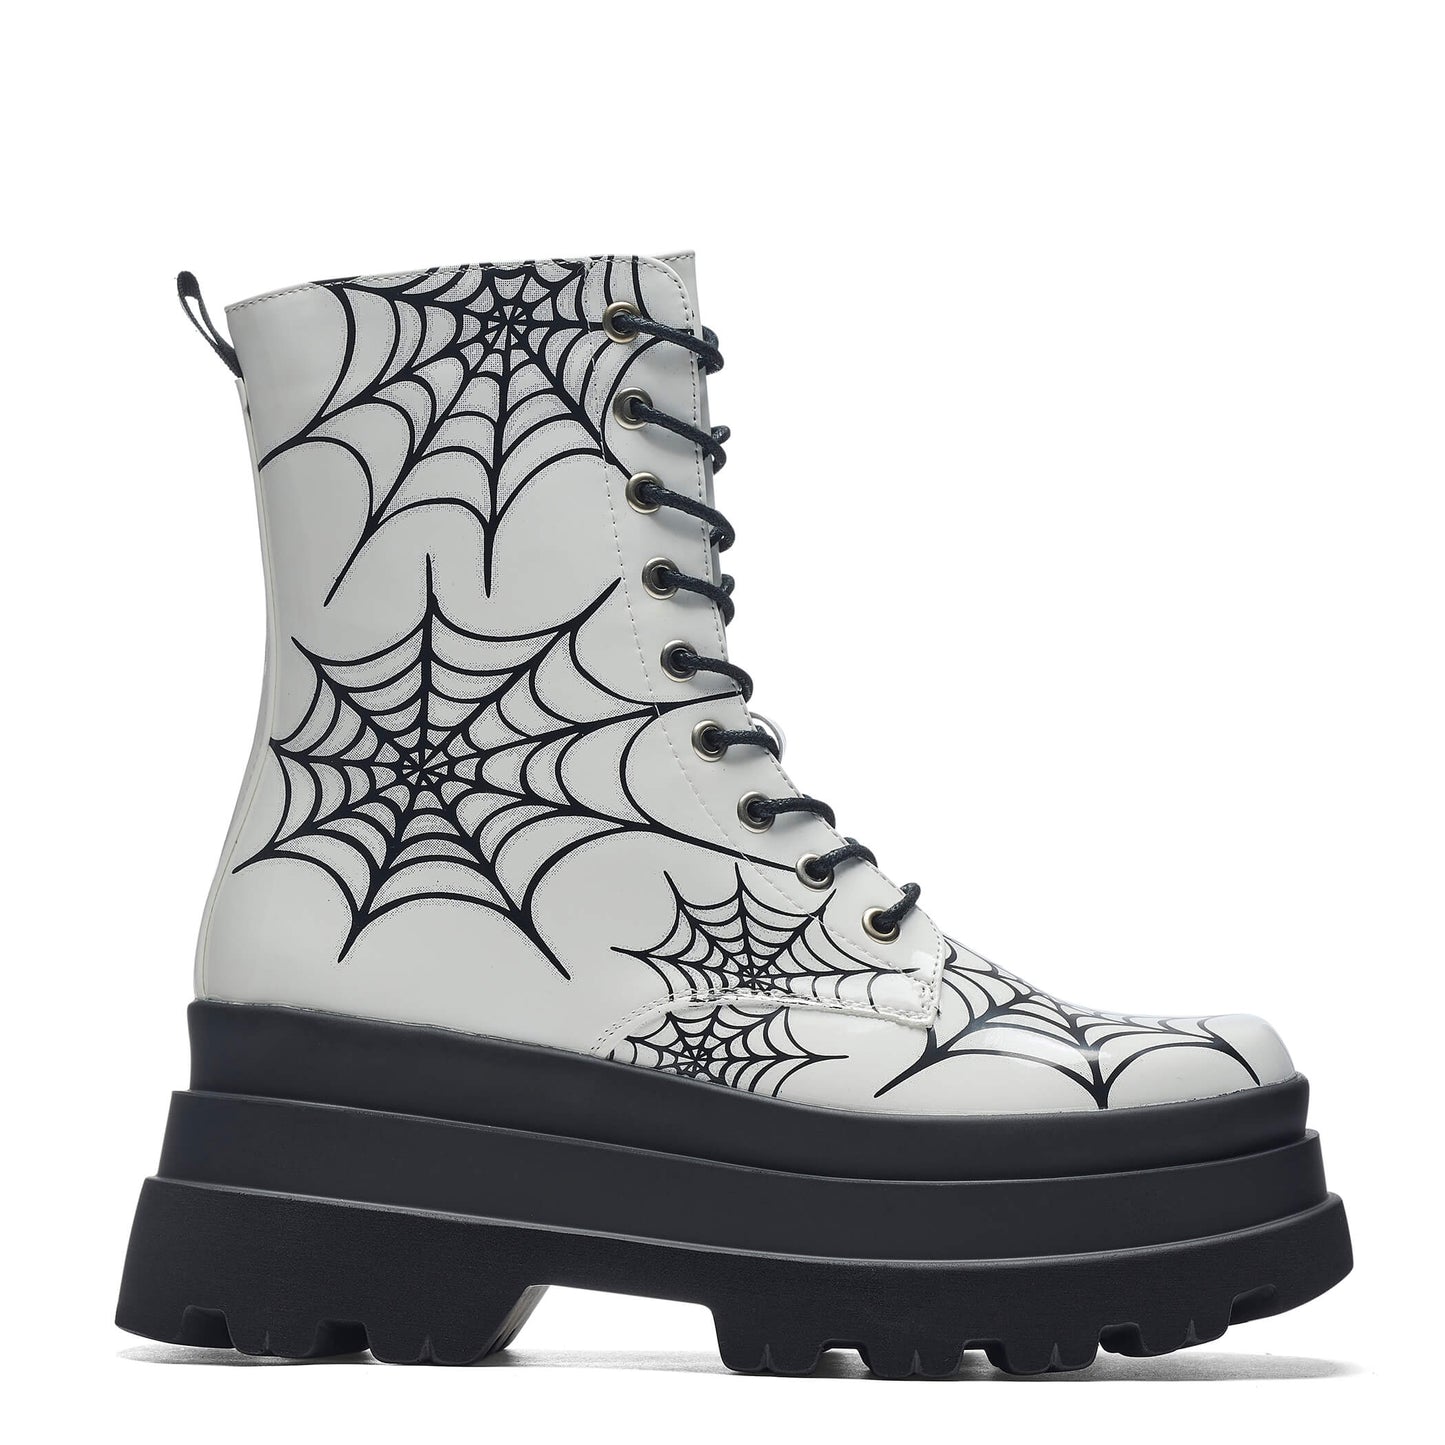 Web Trap Trident Boots - Ankle Boots - KOI Footwear - White - Side View